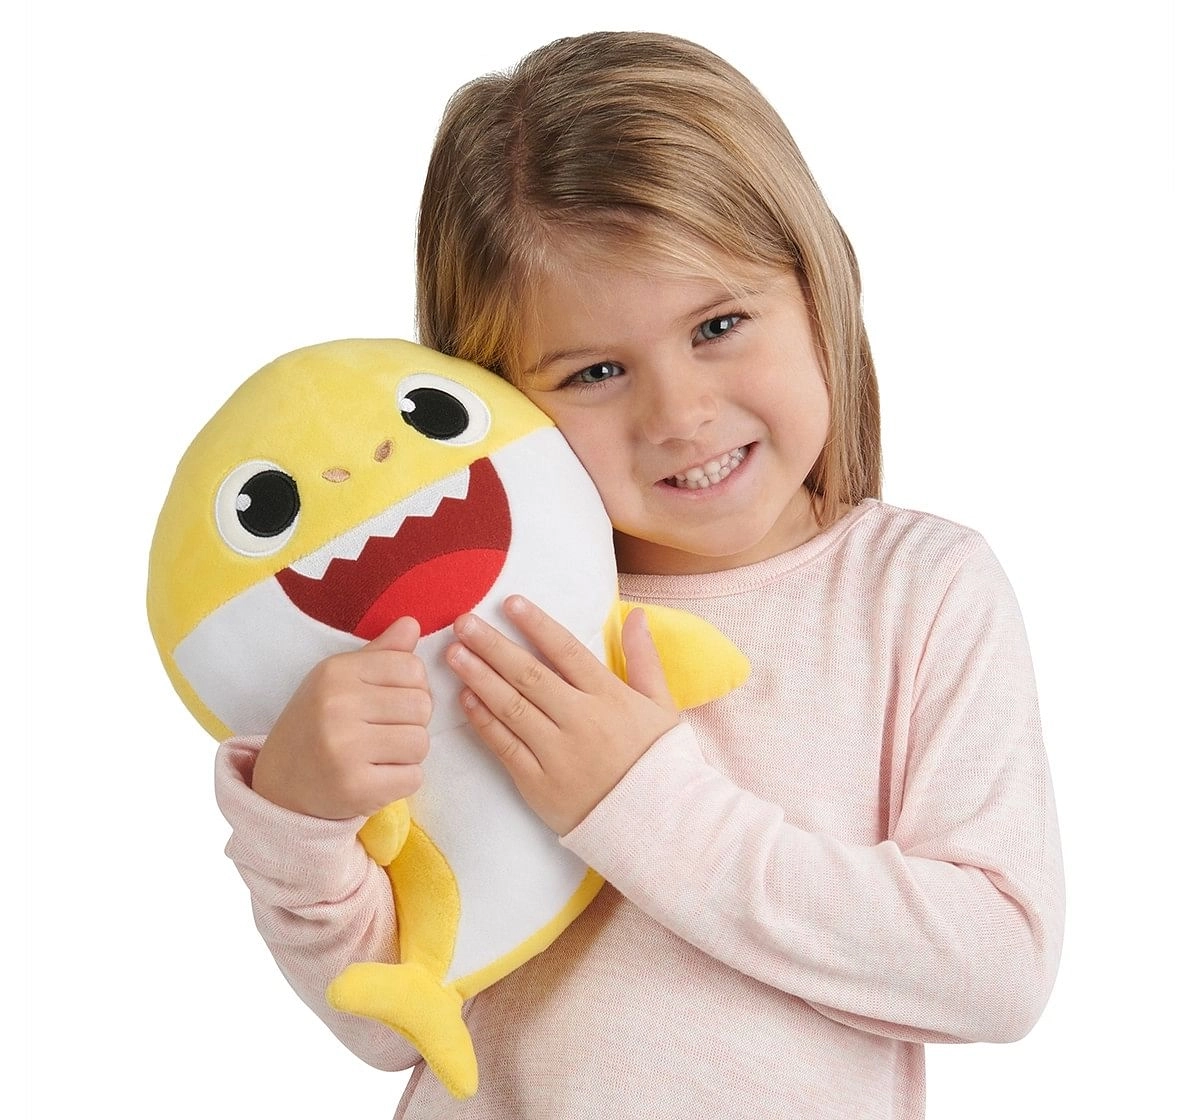 Shark Family Song Doll - Baby Shark for Kids age 3Y+